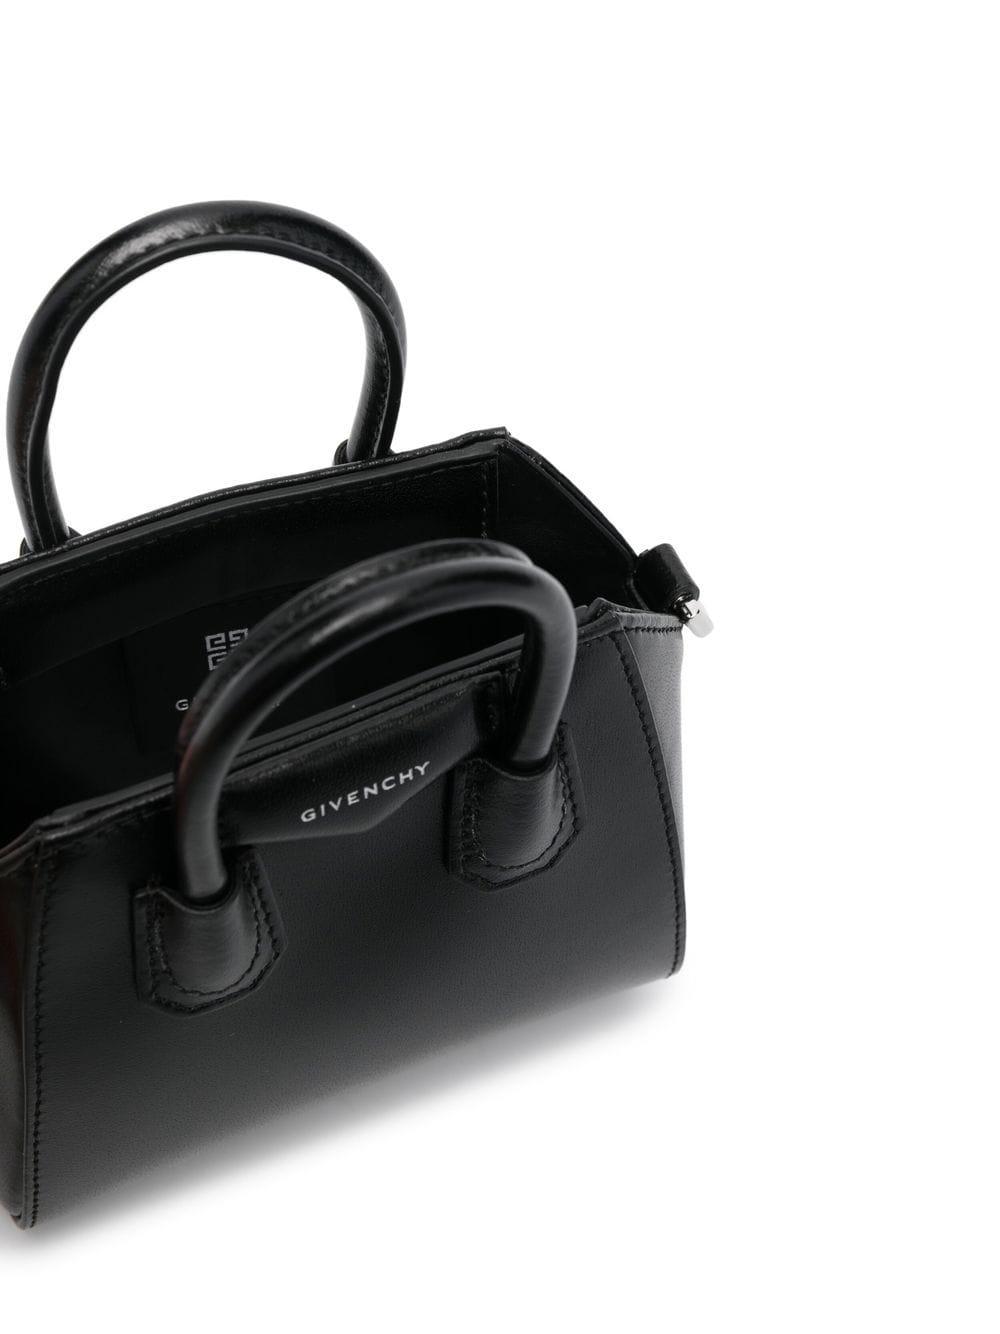 Givenchy Bags for Women - FARFETCH